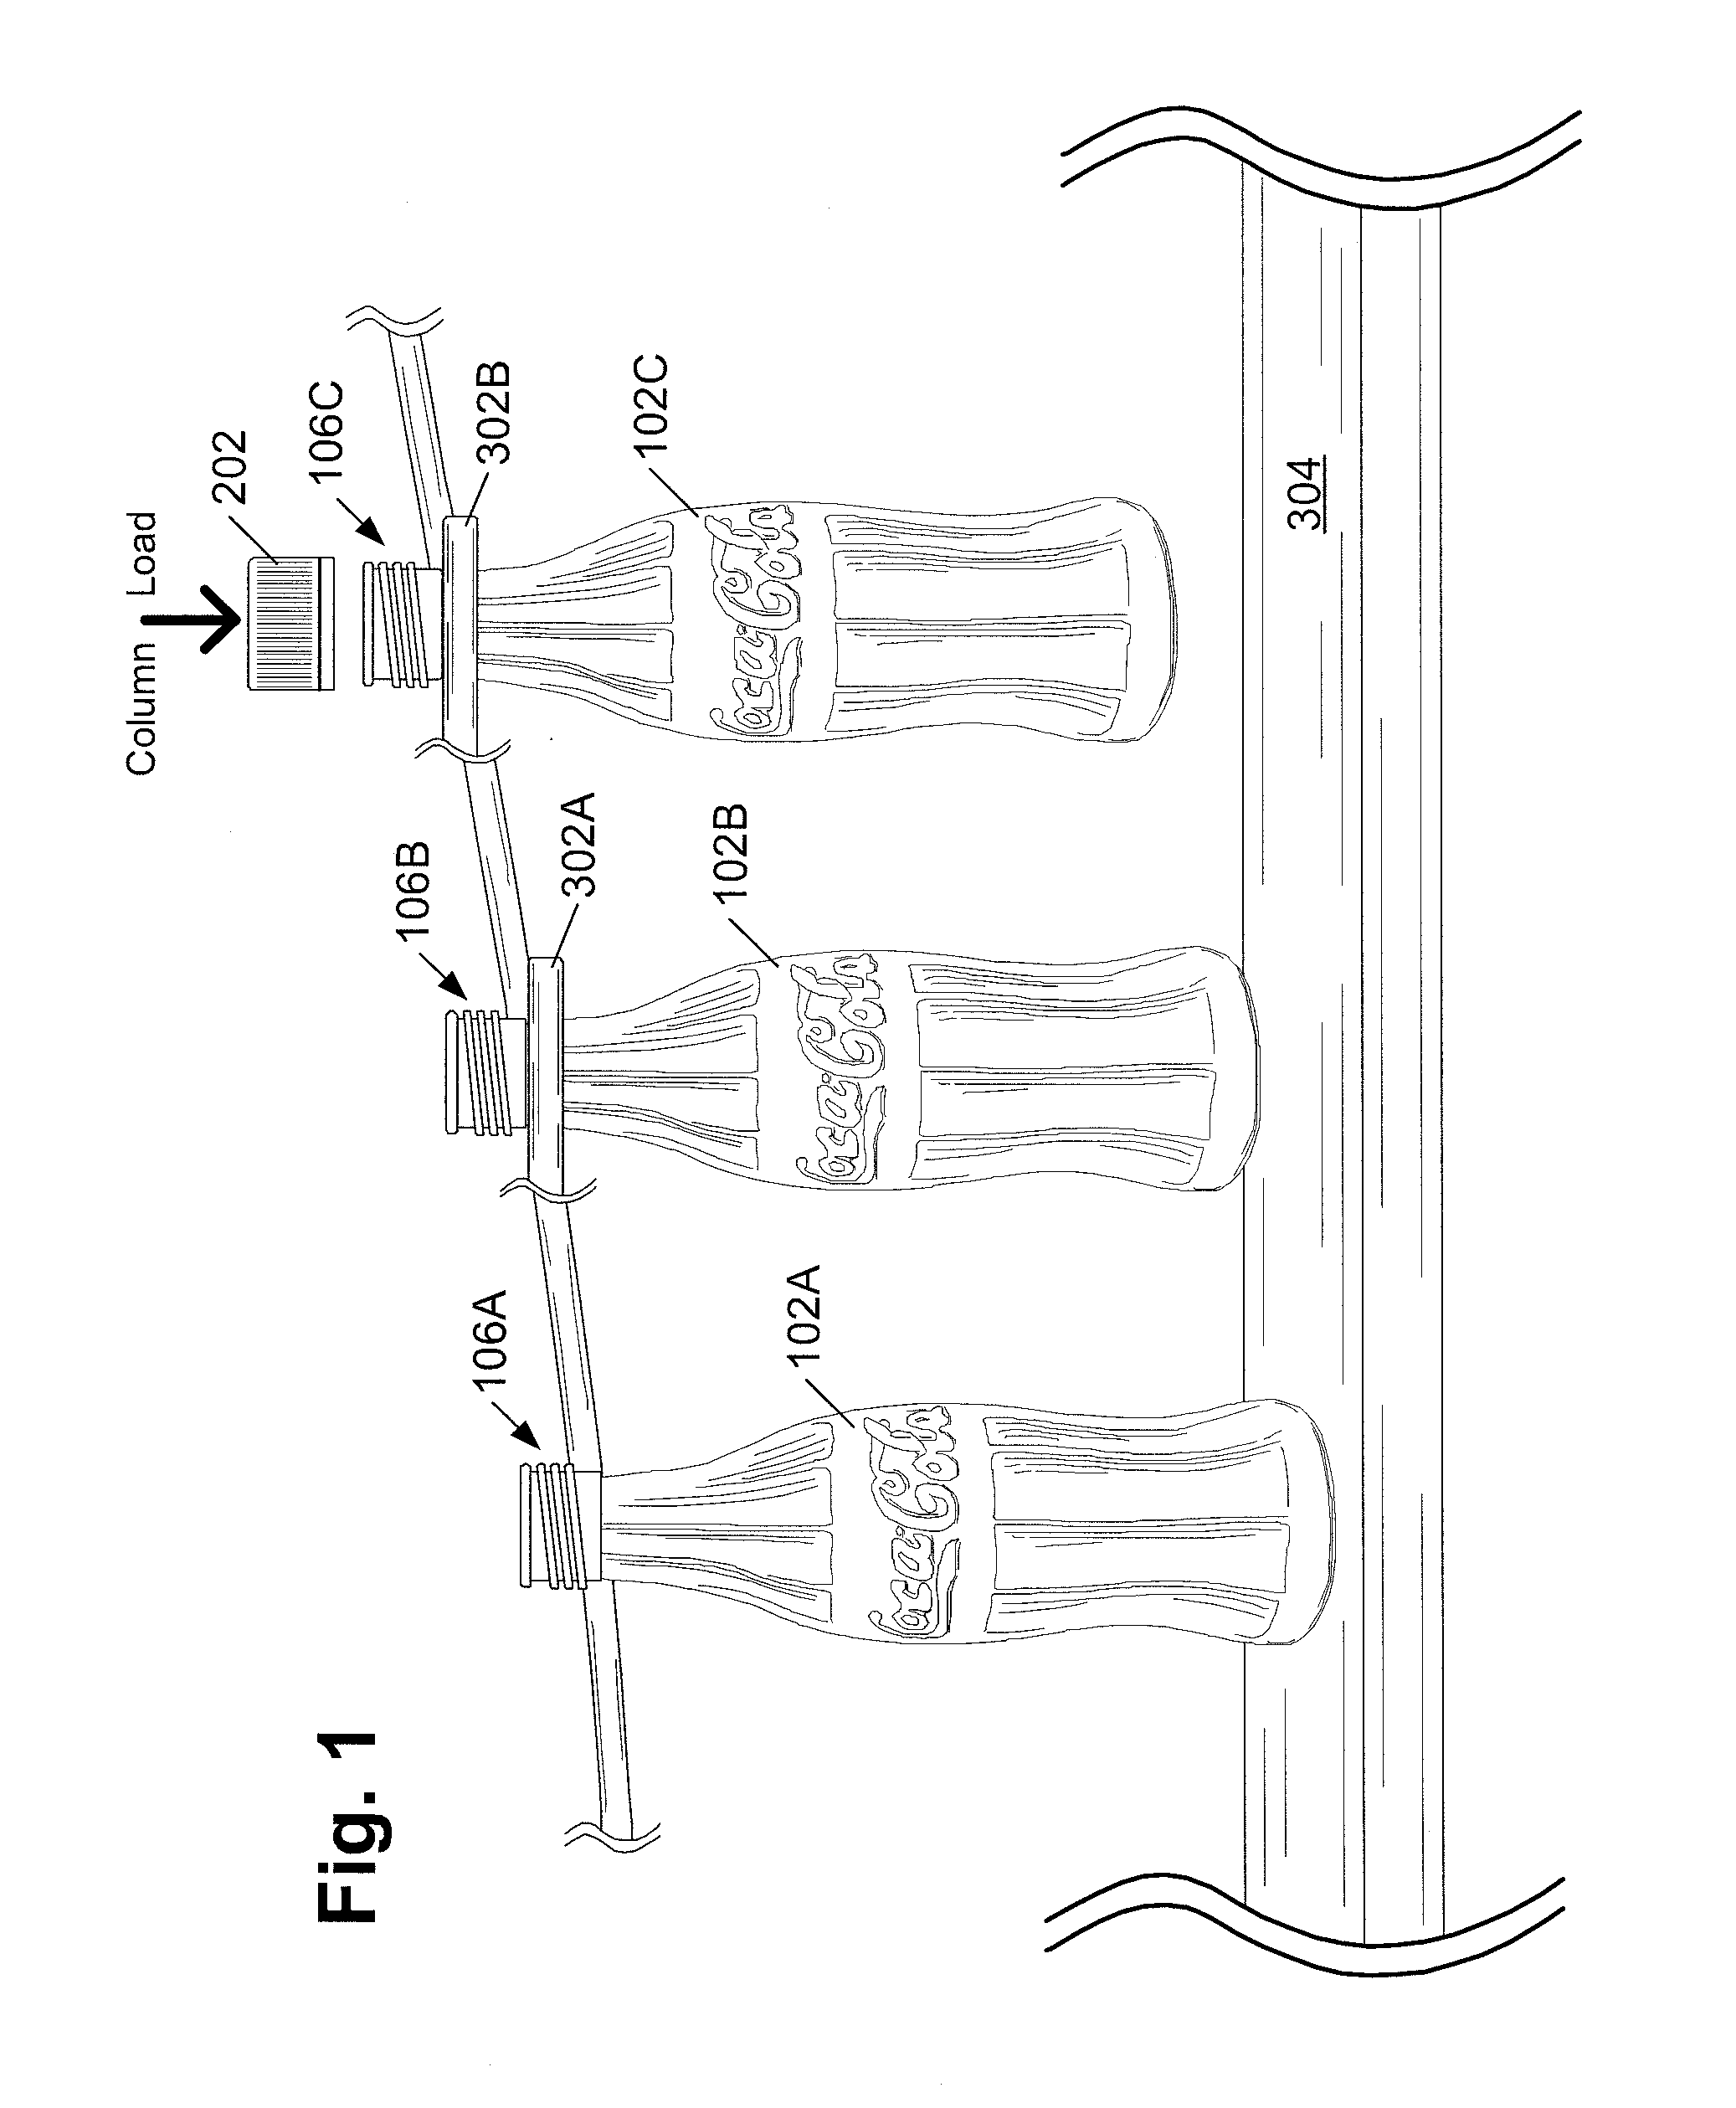 Method of isolating column loading and mitigating deformation of shaped metal vessels